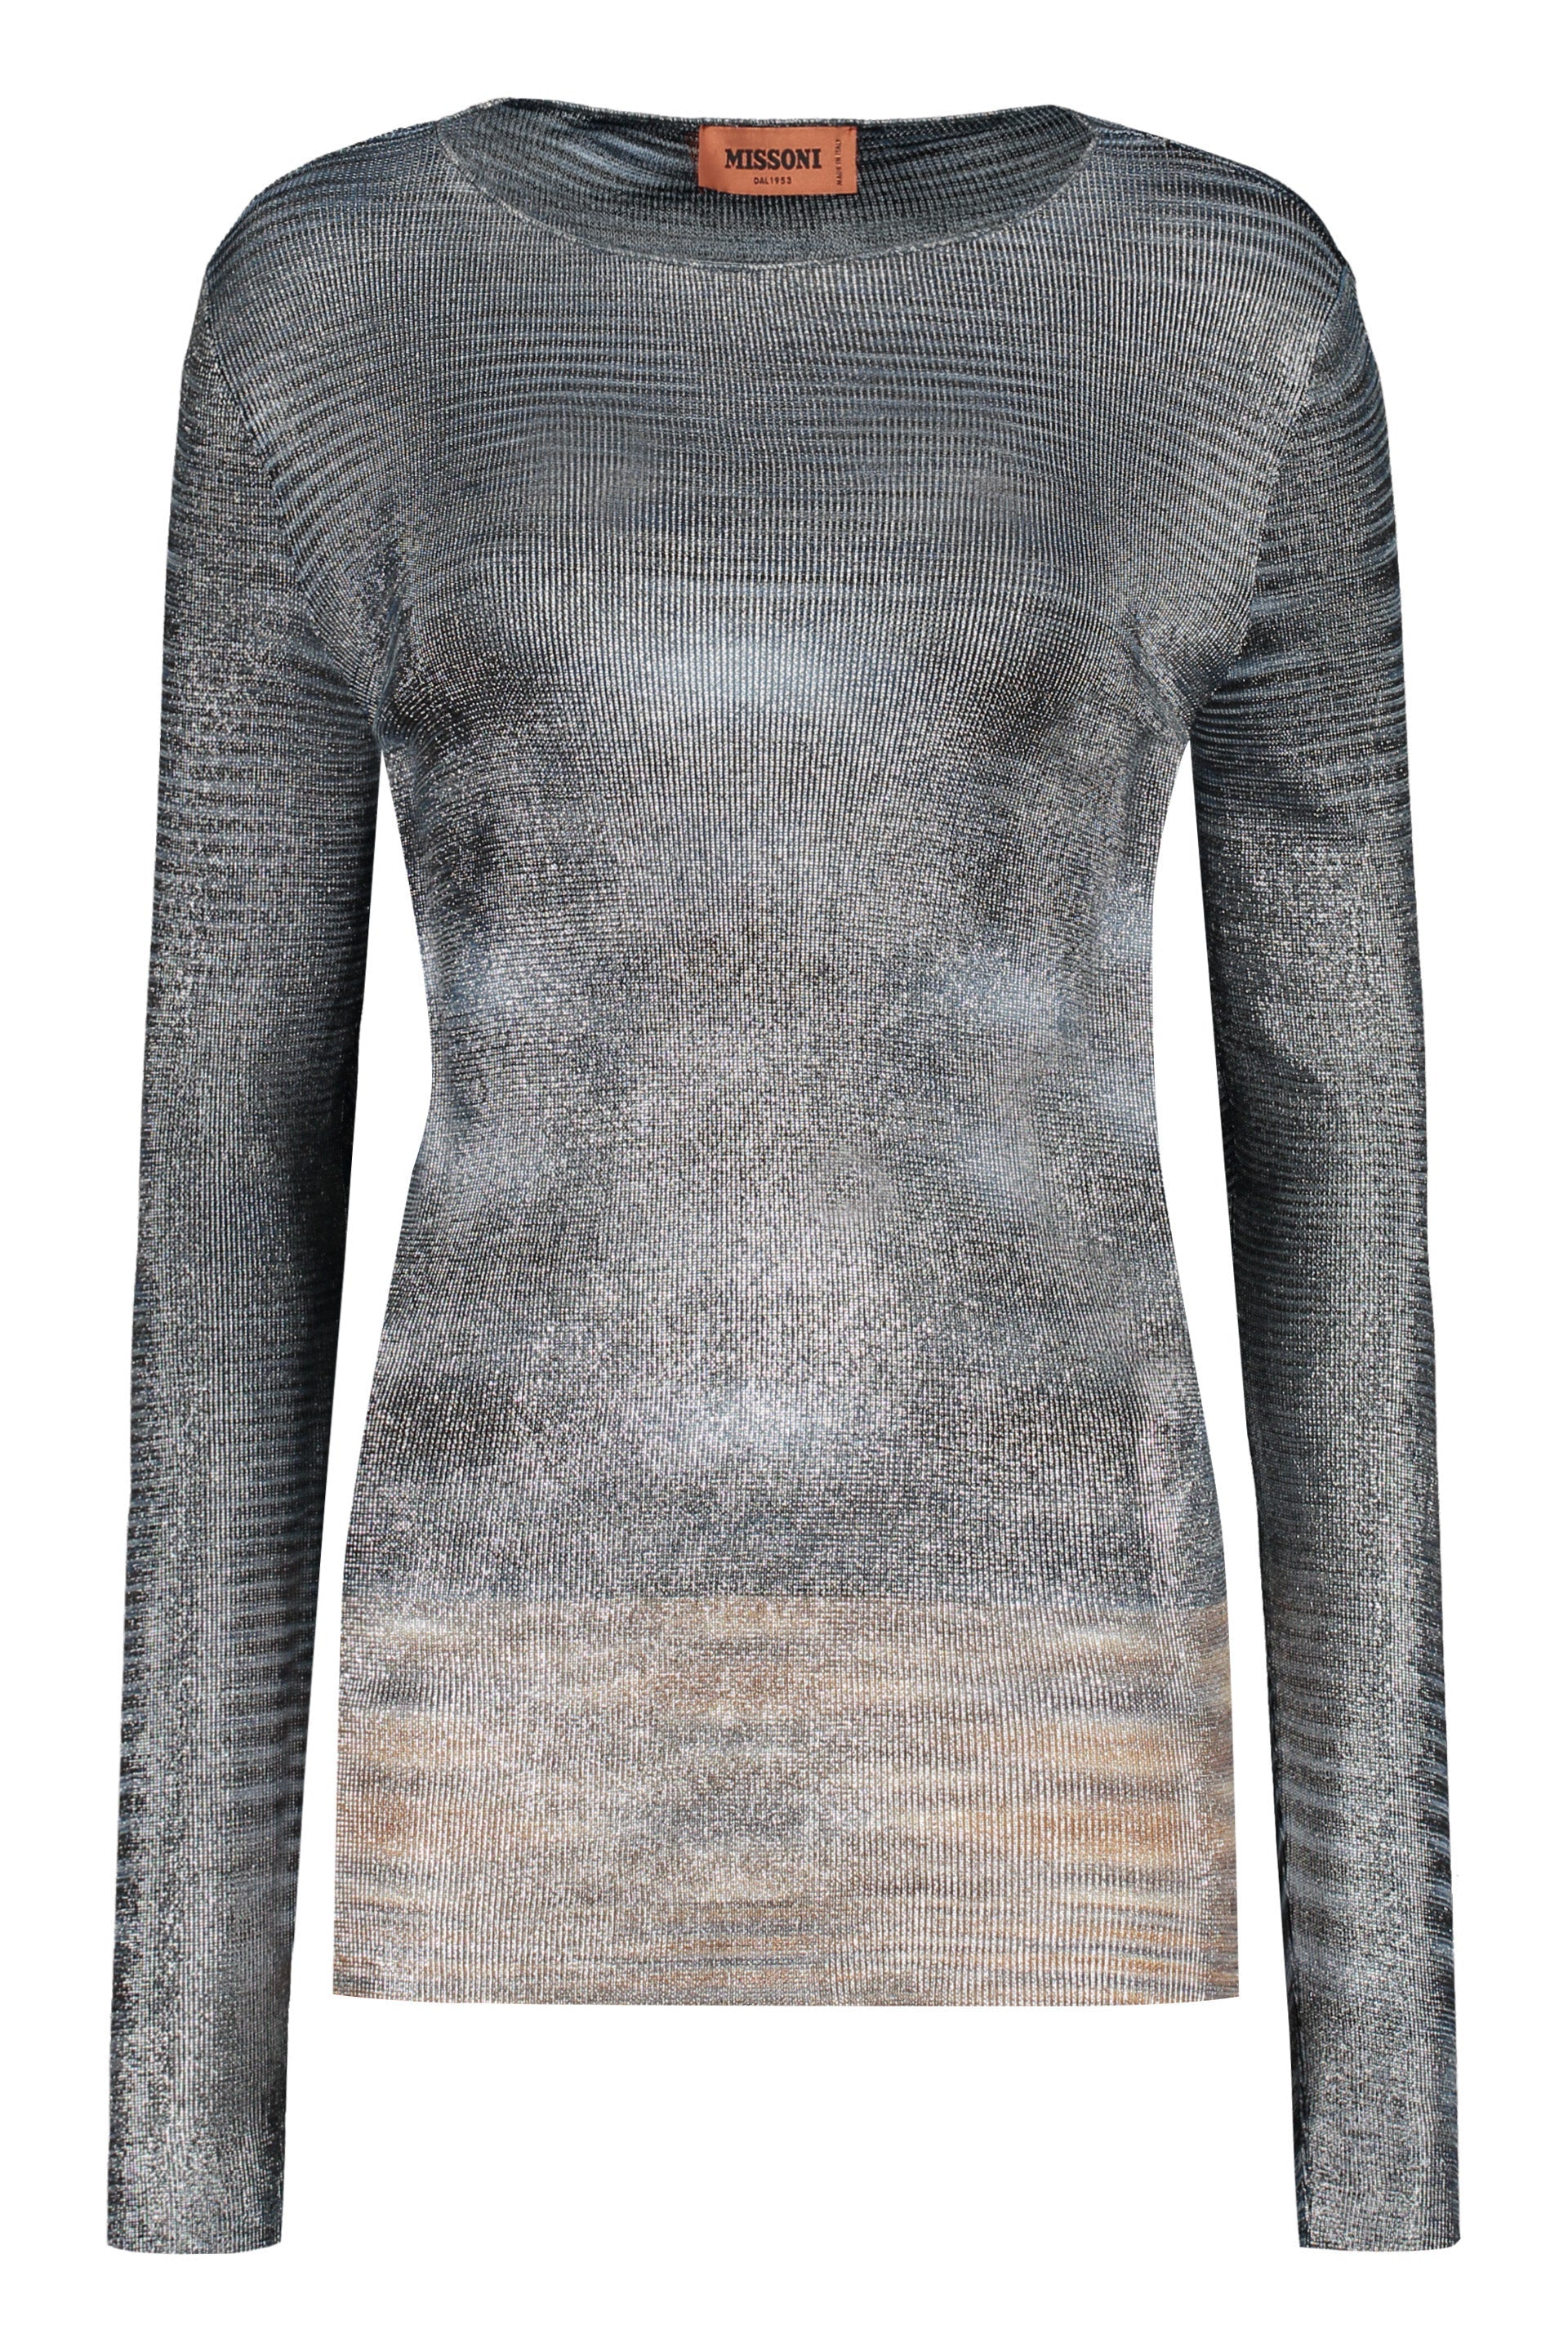 Knitted viscosa-blend top